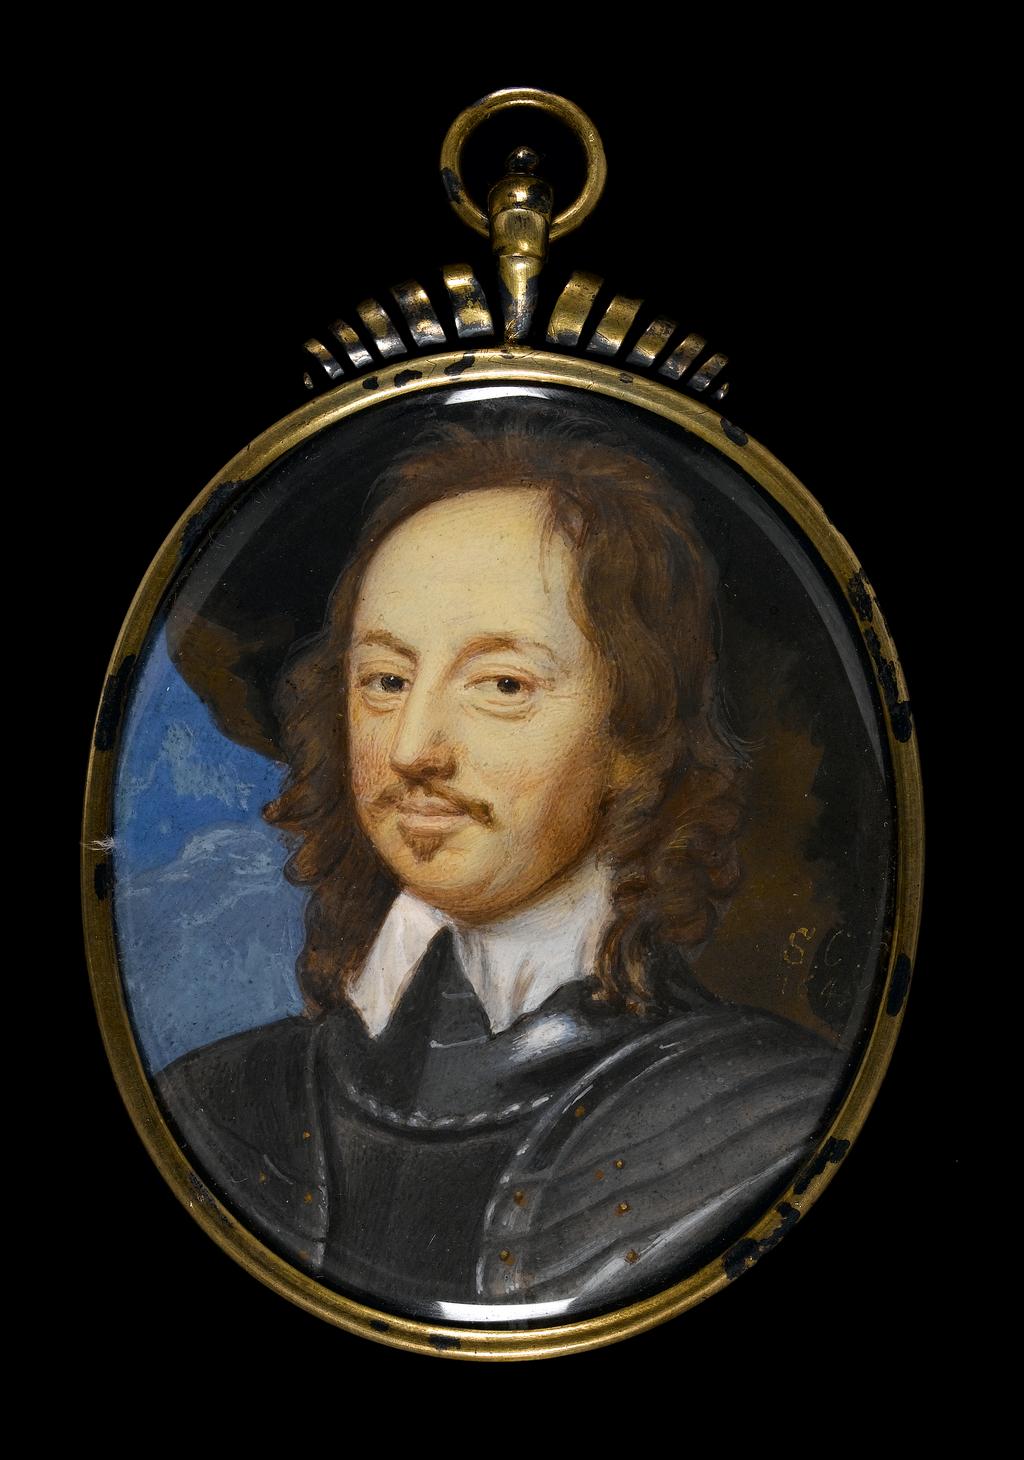 An image of Cooper, Samuel. Montague Bertie, 2nd Earl of Lindsey c. 1608-66. Watercolour on vellum on card. 1649.